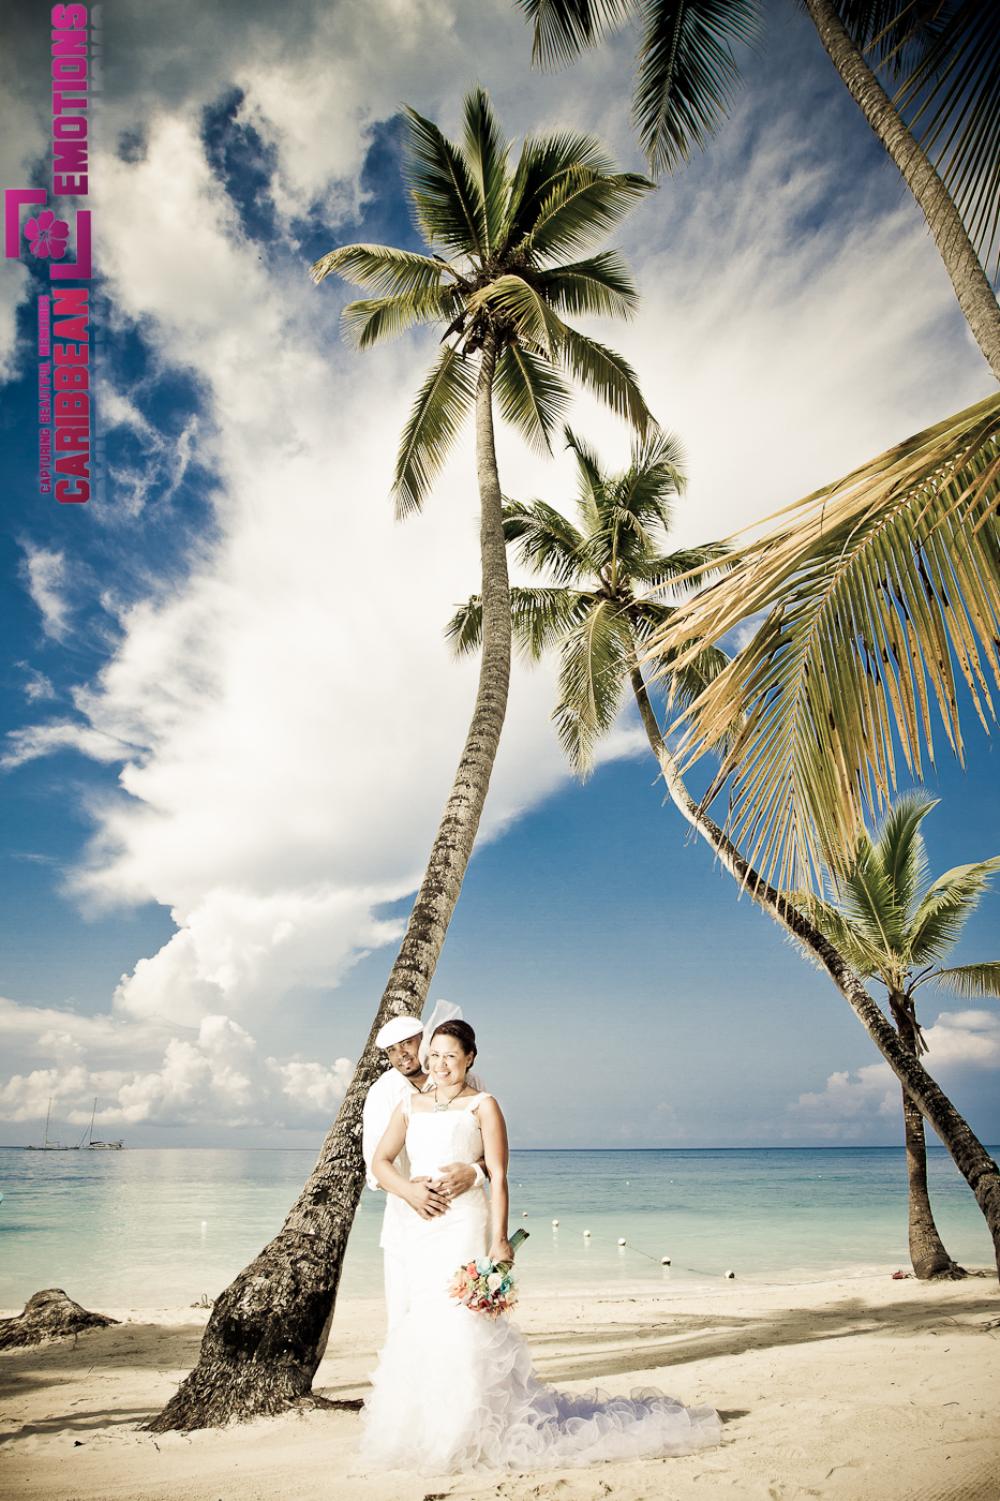 Photographer needed for Punta Cana wedding on February 2nd 